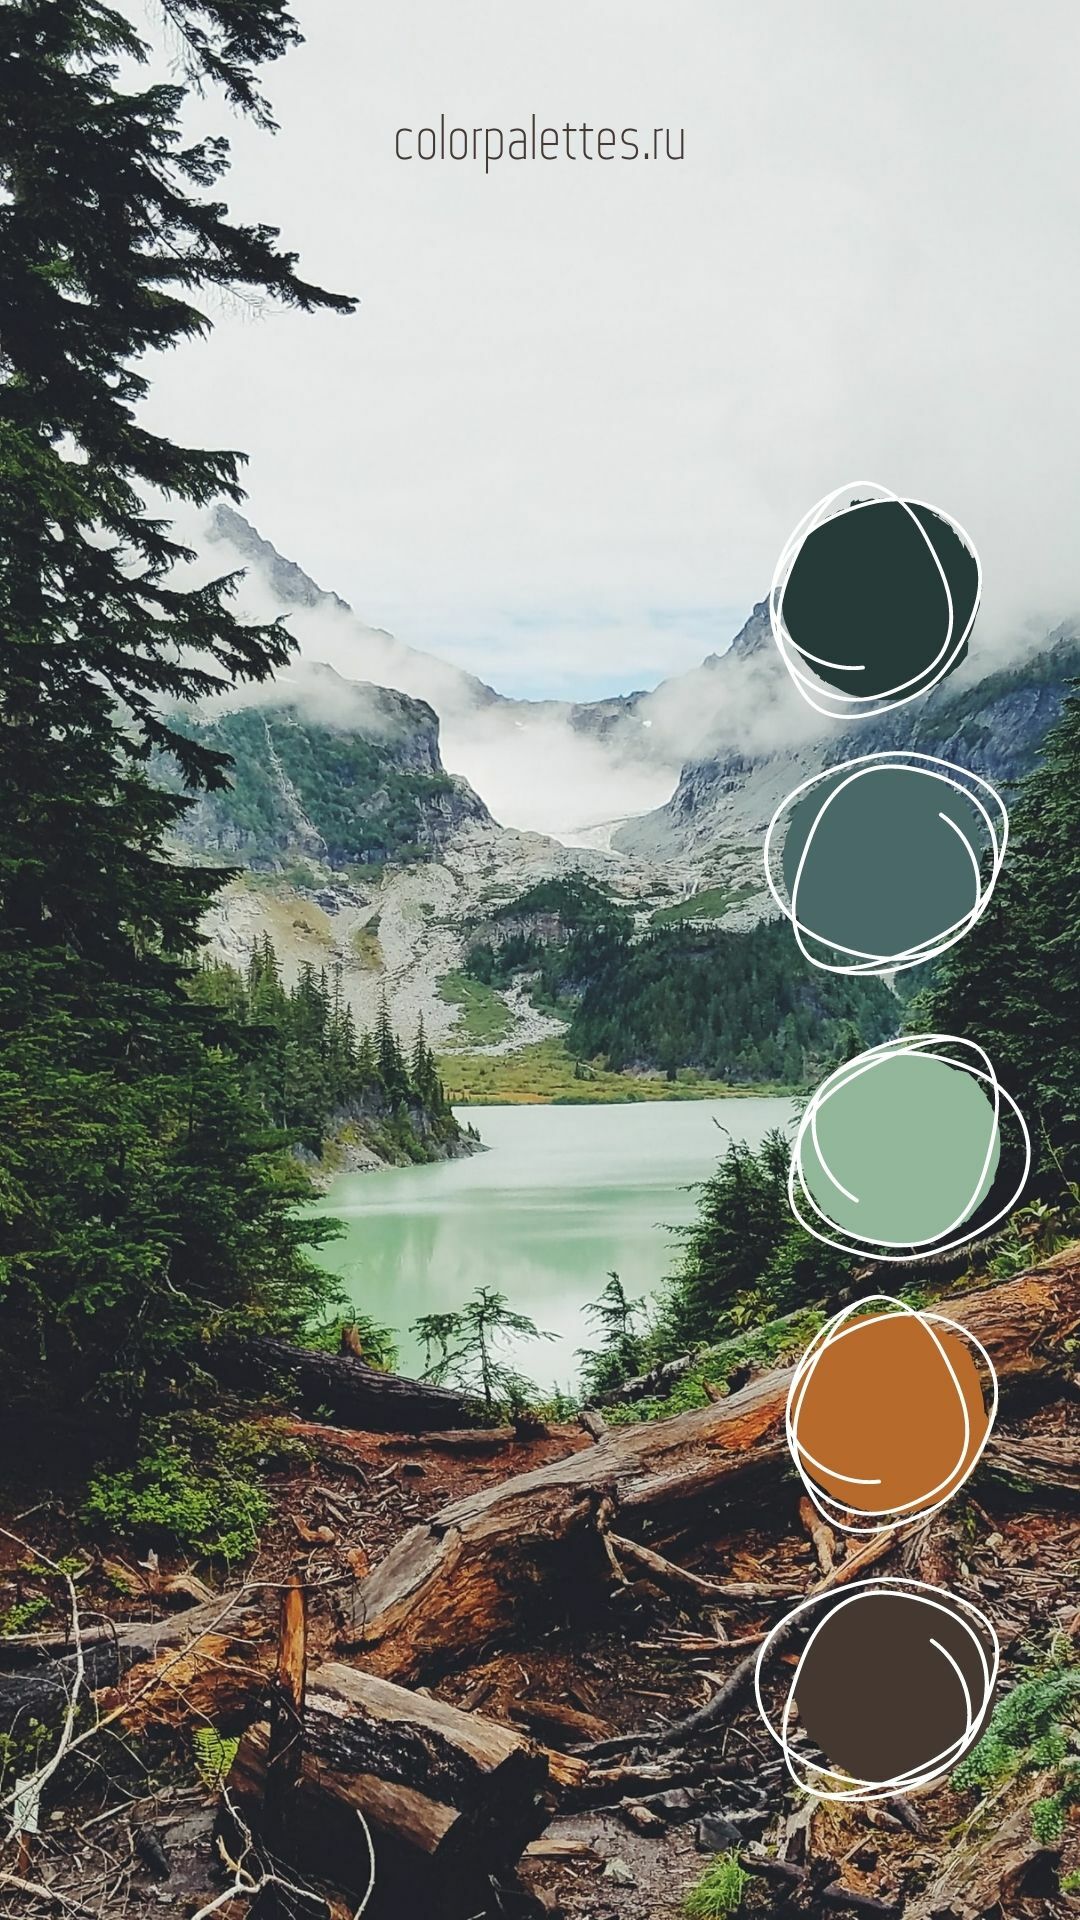 Nature palette of a mountain lake